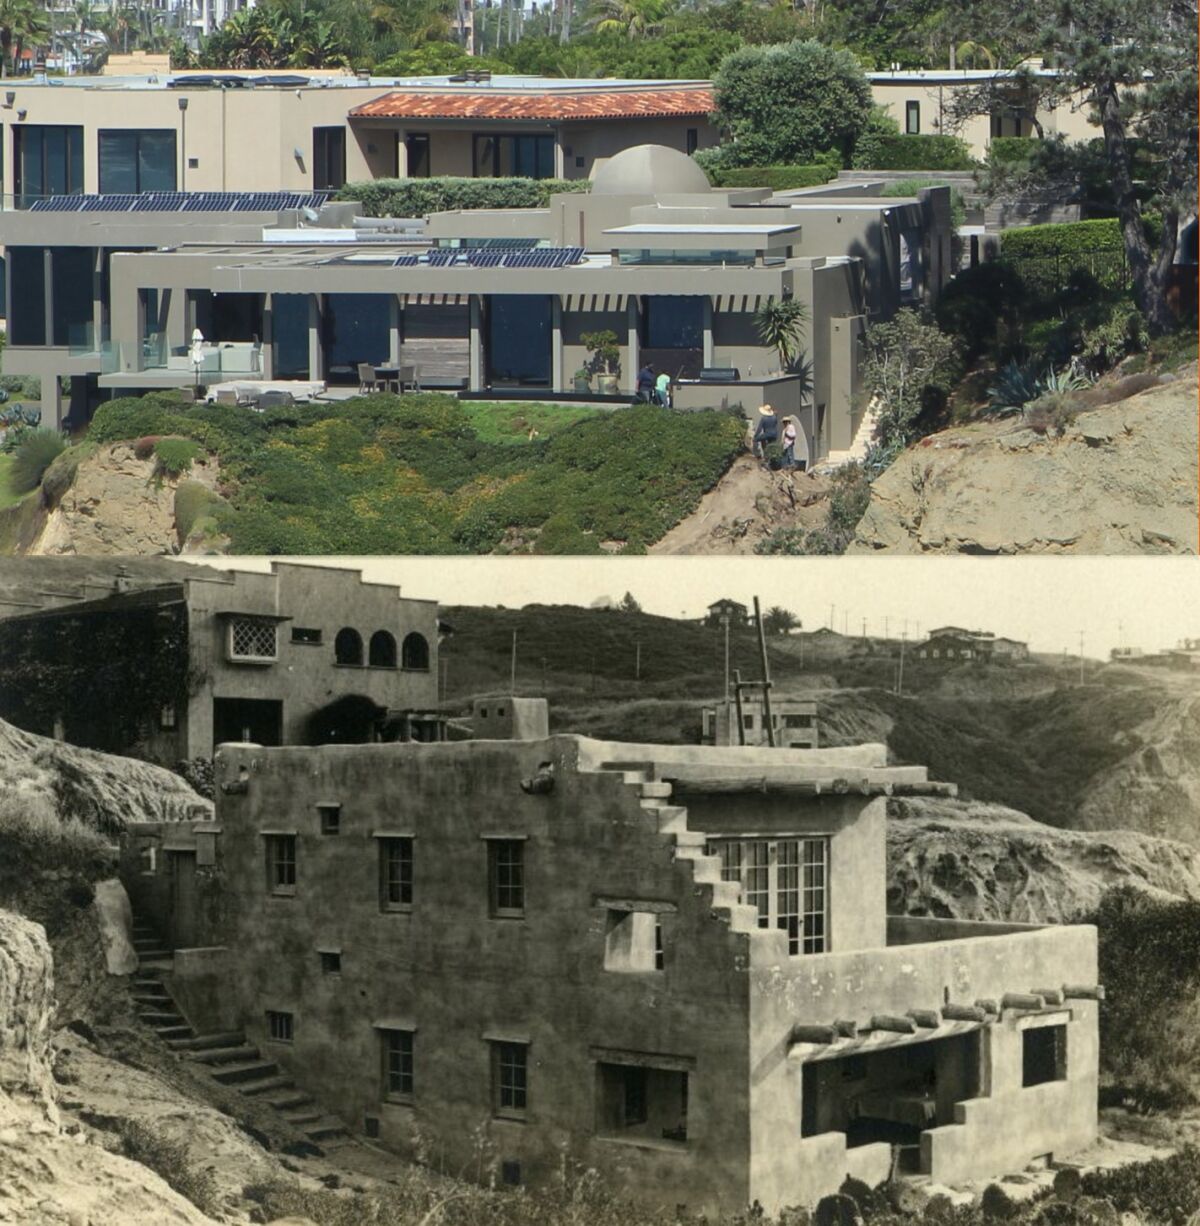 NOW (top): All Hopi has been abandoned at the site today. THEN (bottom): Architect Frank Mead and his partner Richard Requa built this pueblo-style masterpiece in 1914.